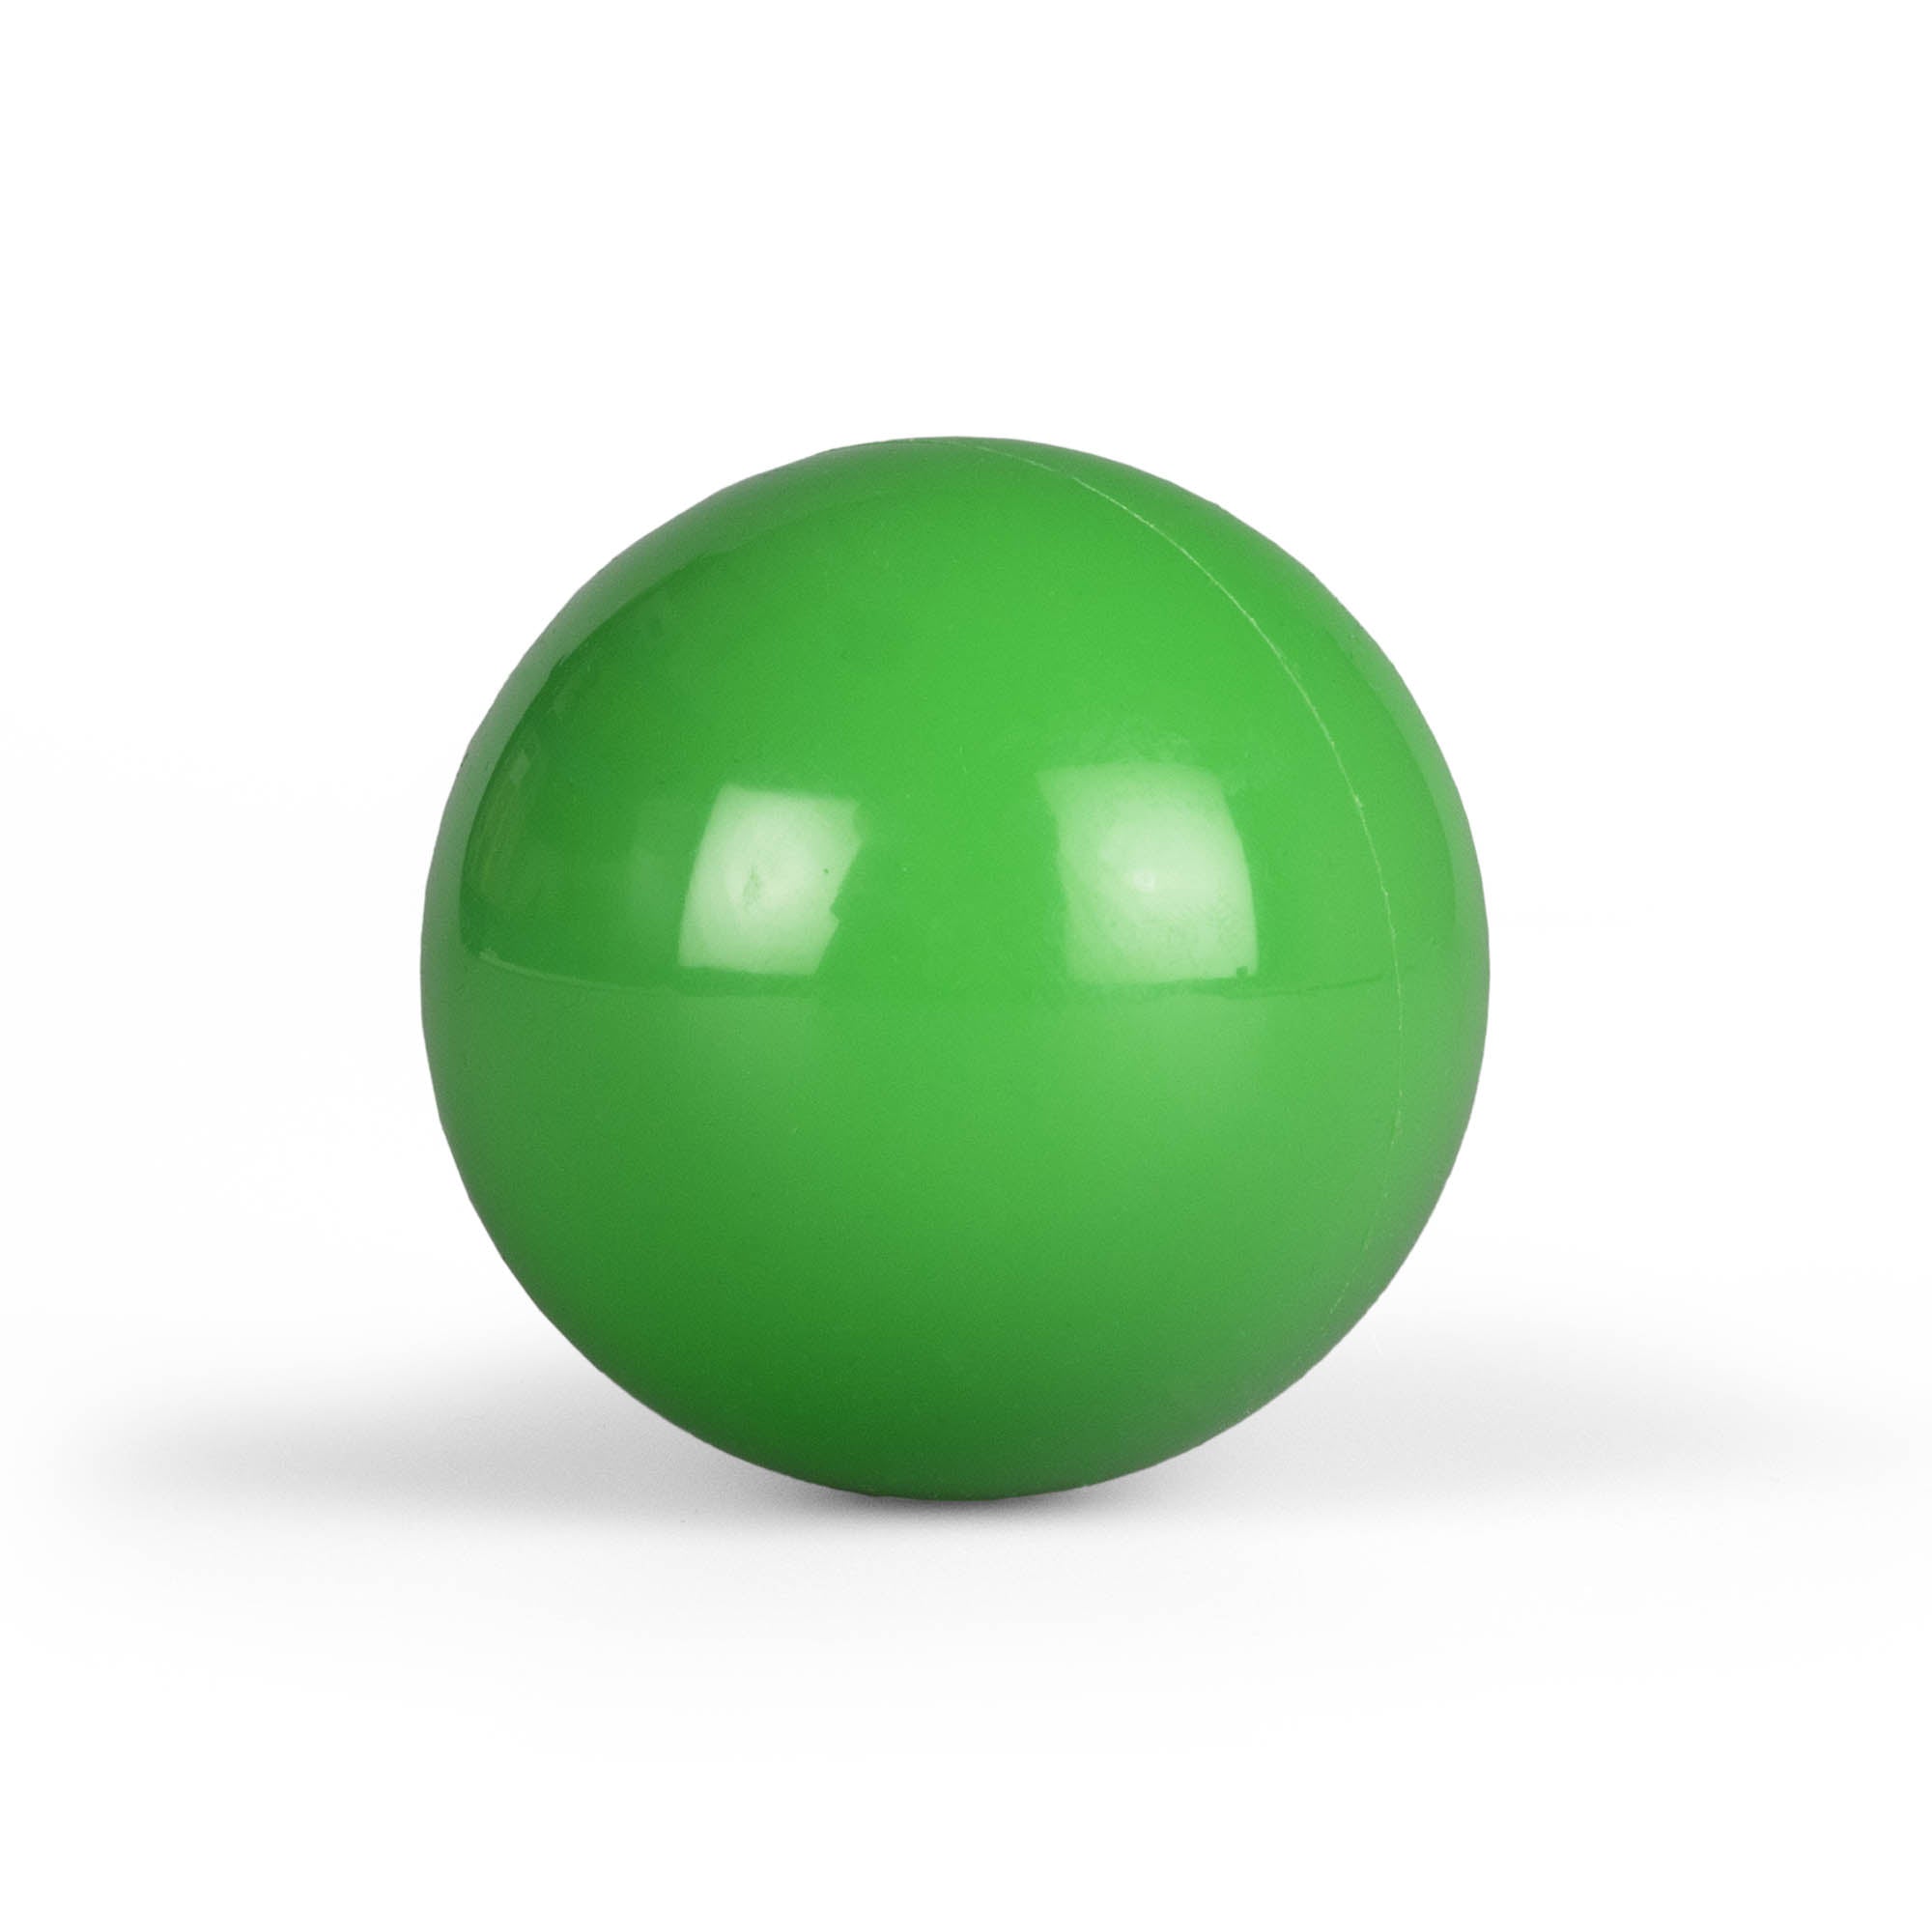 Mr babache 100mm stage ball green straight on white background